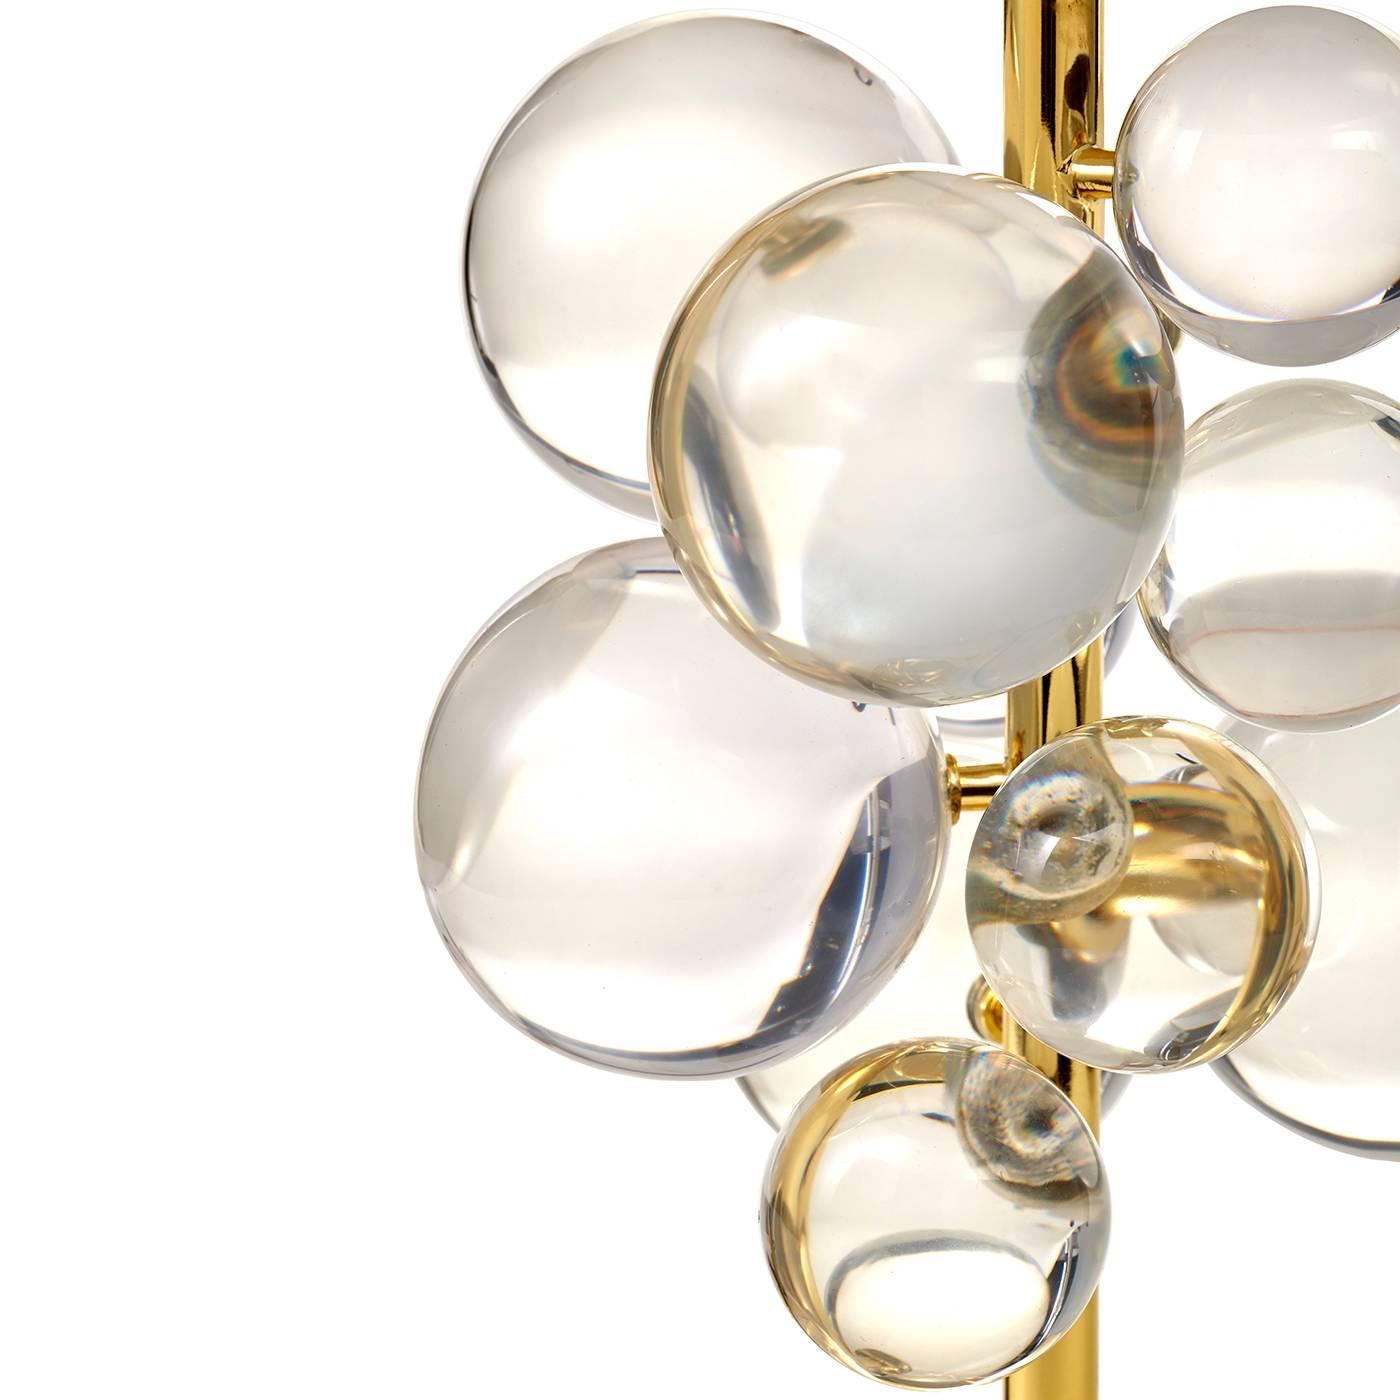 Lustrous sculpture. A constellation of clear Lucite spheres floats on a slim brass stem anchored by a sculptural marble base and topped with a brass dome. The shade refracts the light, makes the orbs sparkle, and creates a warm glow. The sculptural